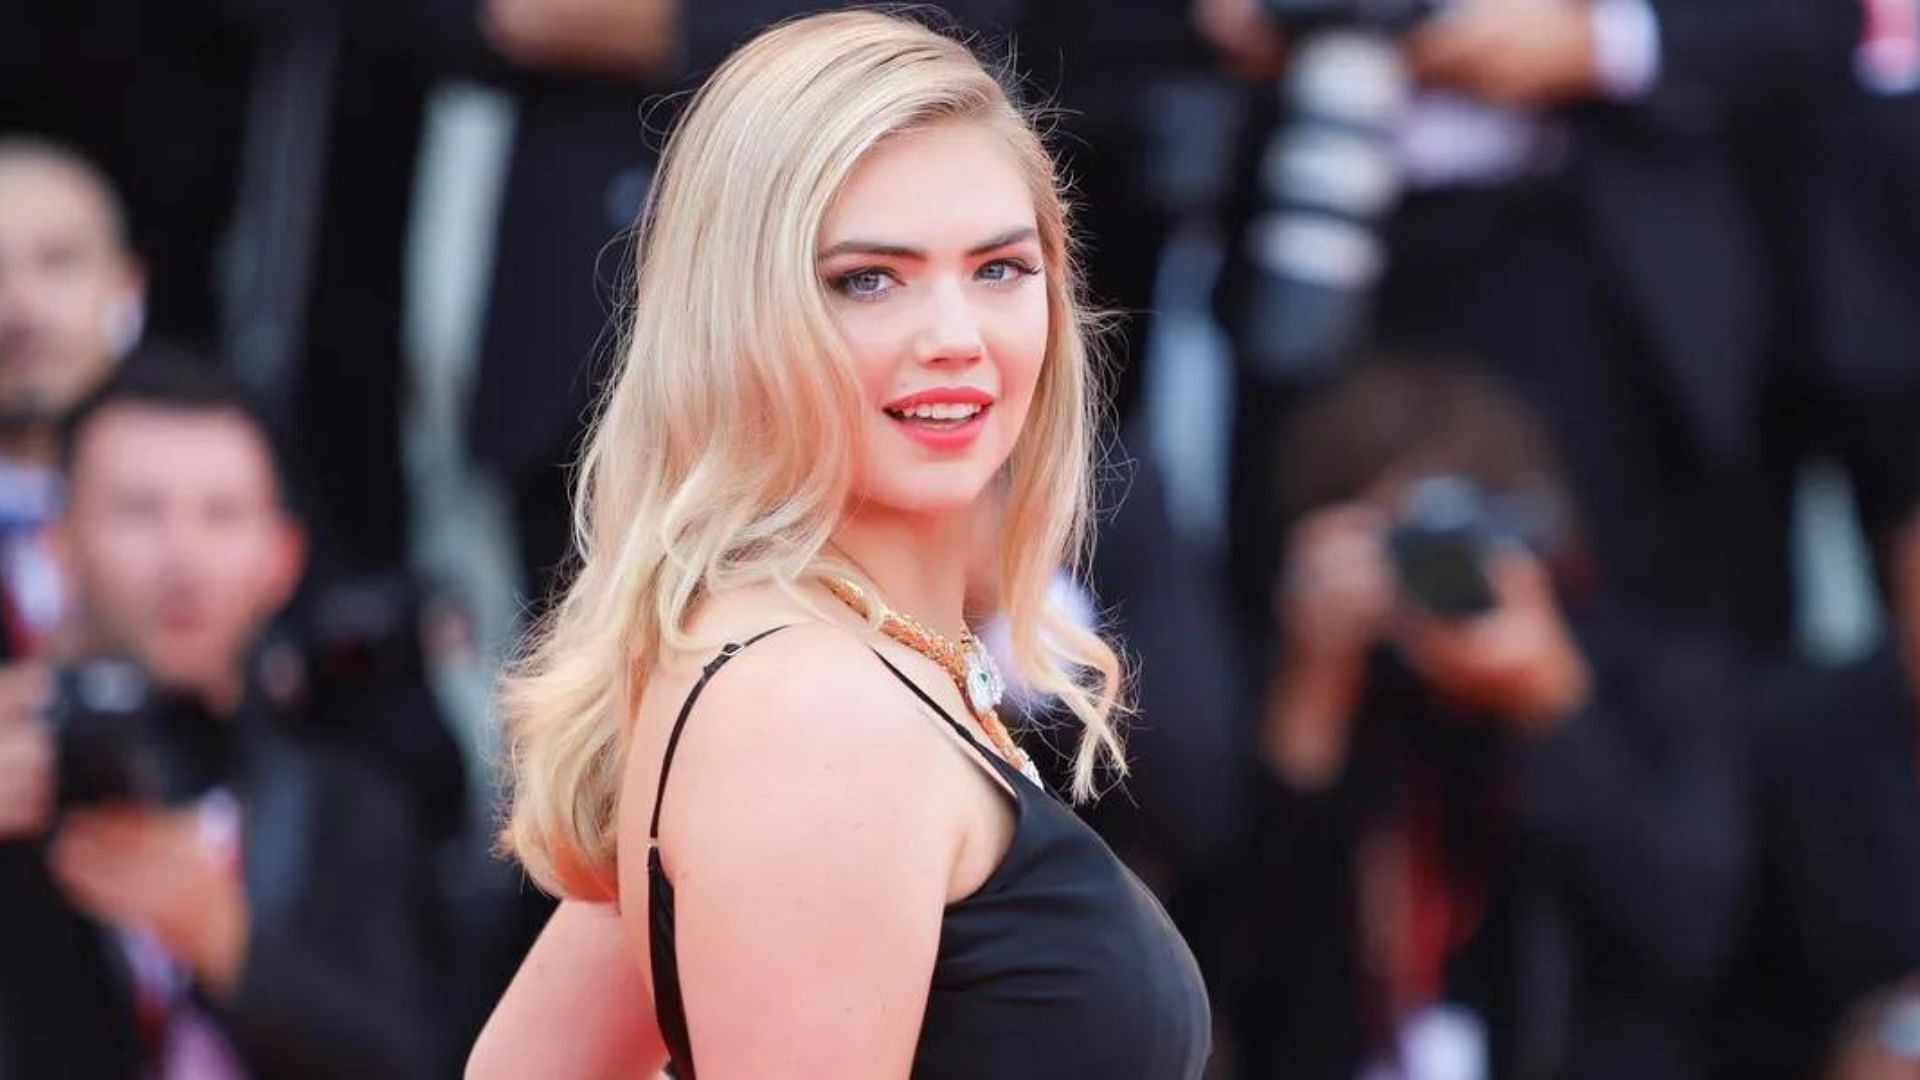 When Kate Upton voiced concern over society losing the art of internet usage